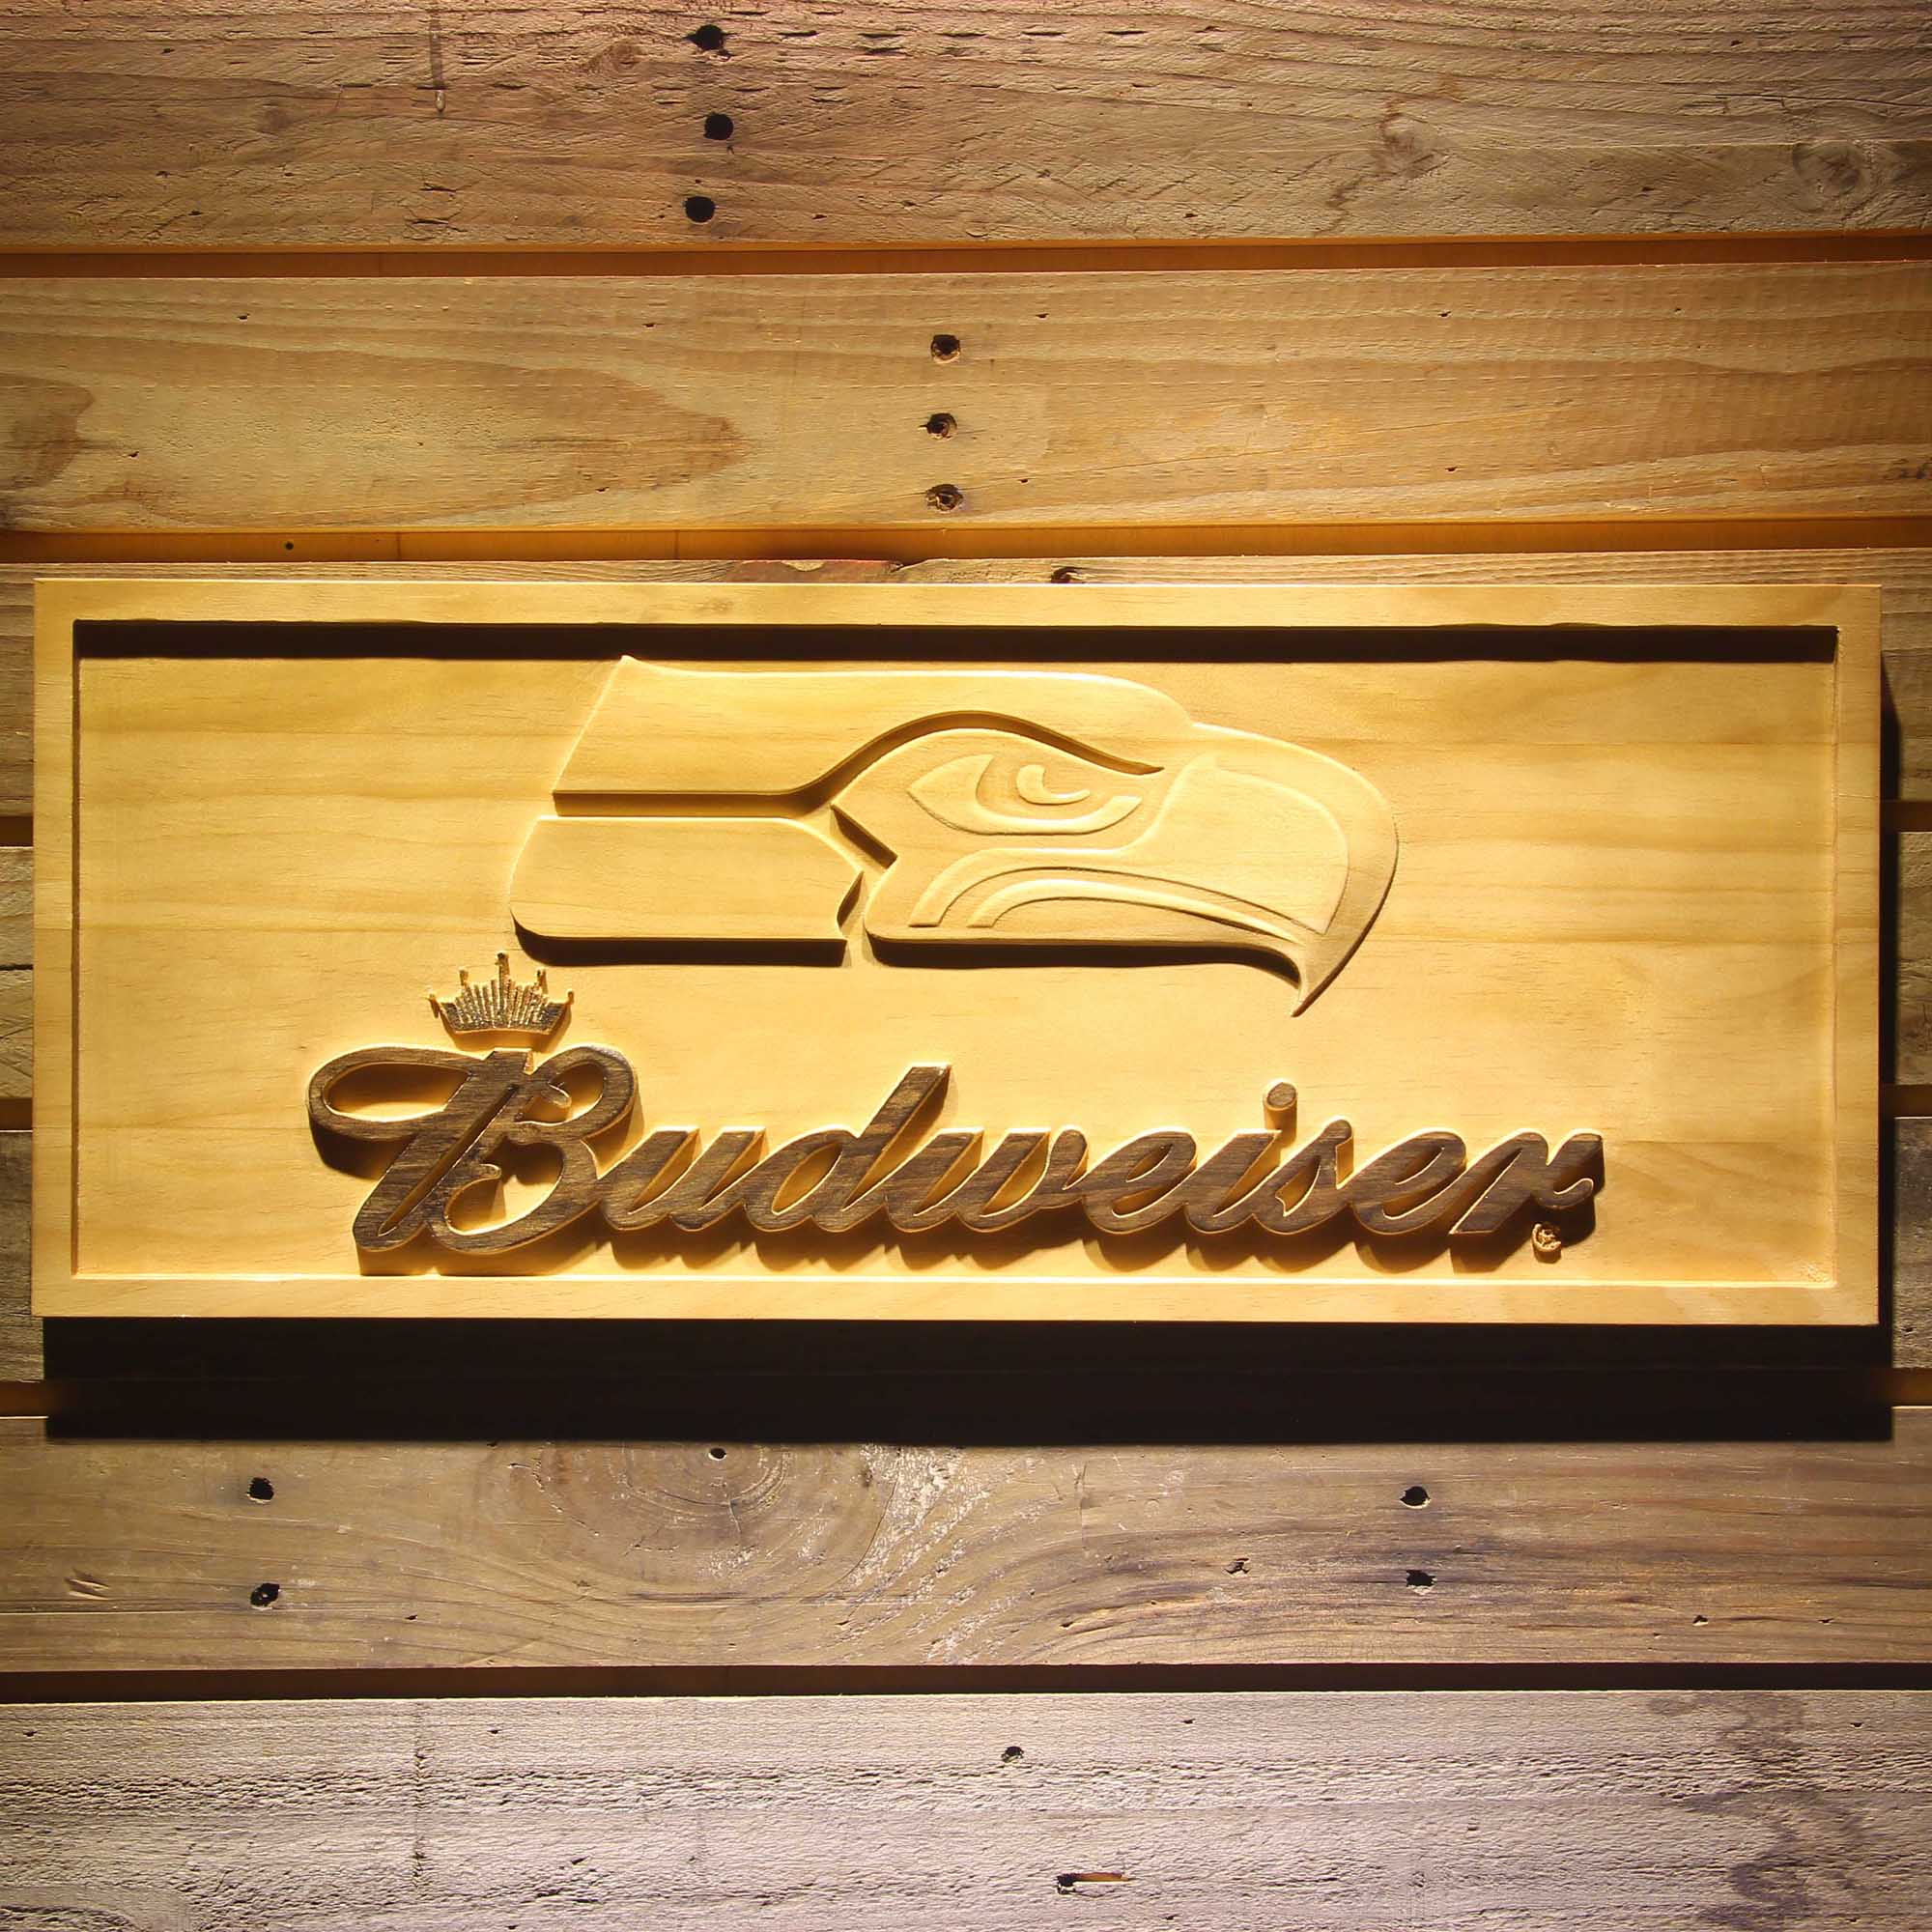 Seattle Seahawks Budweiser 3D Wooden Engrave Sign